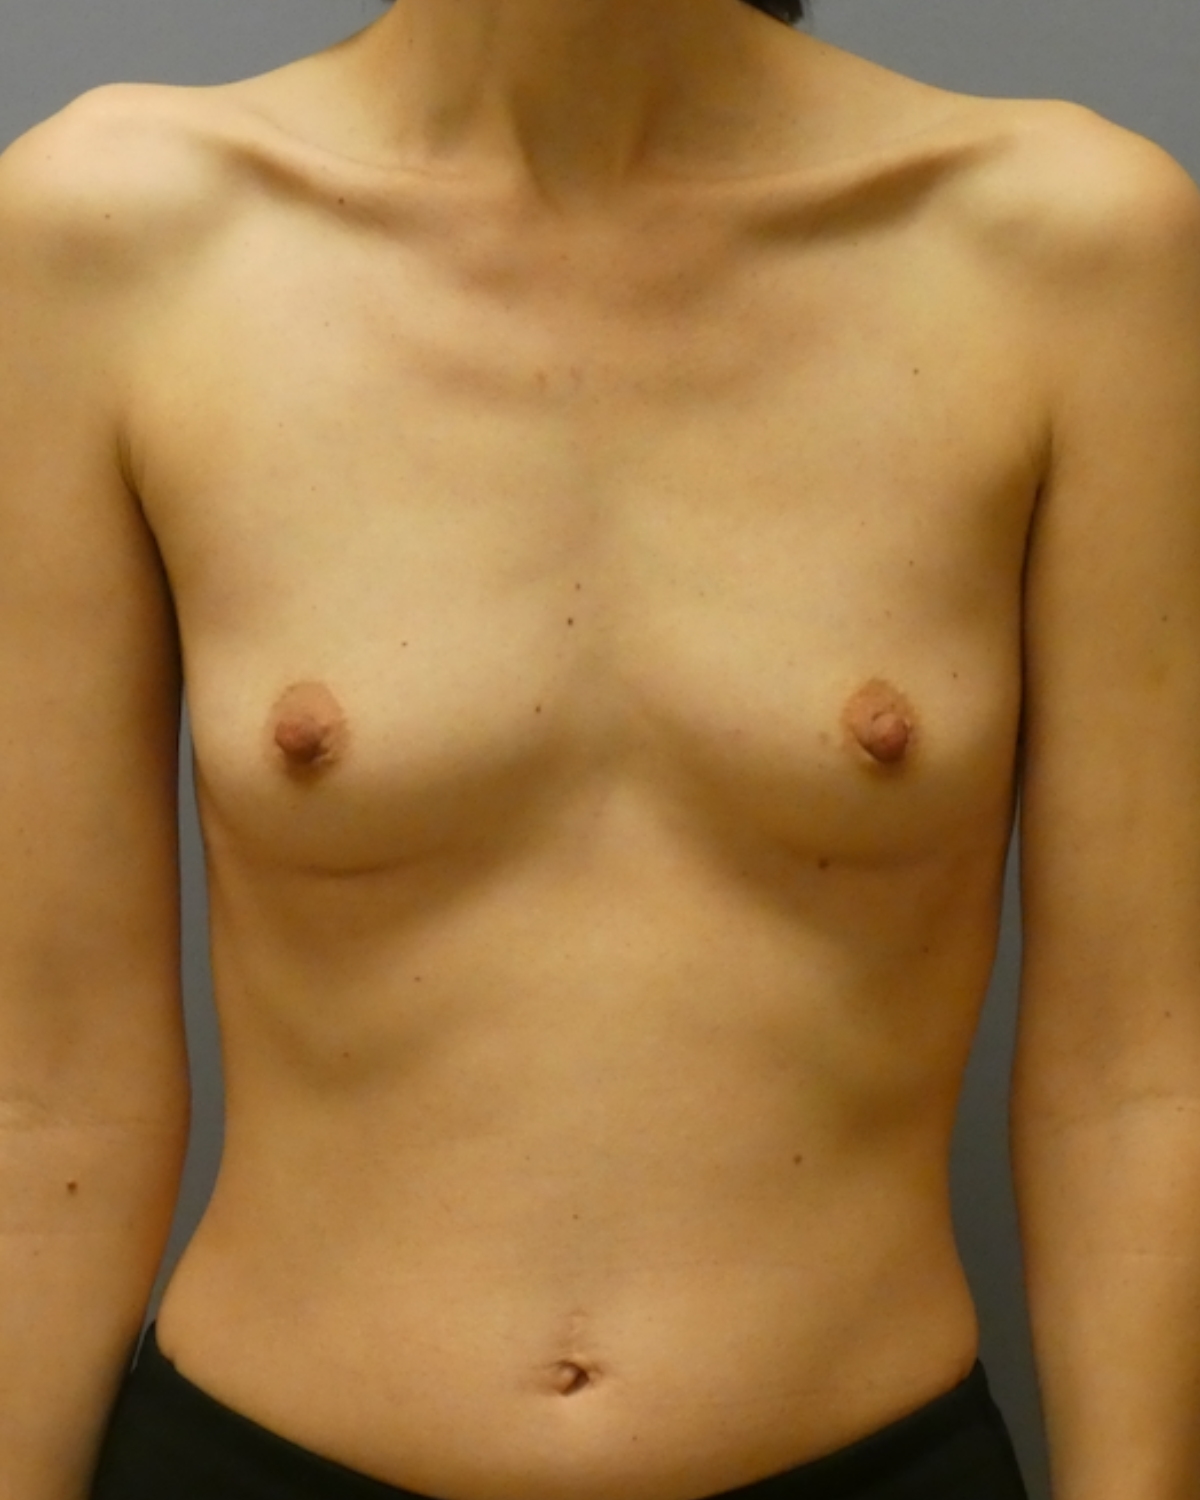 Breast Augmentation Gallery Before Patient 1